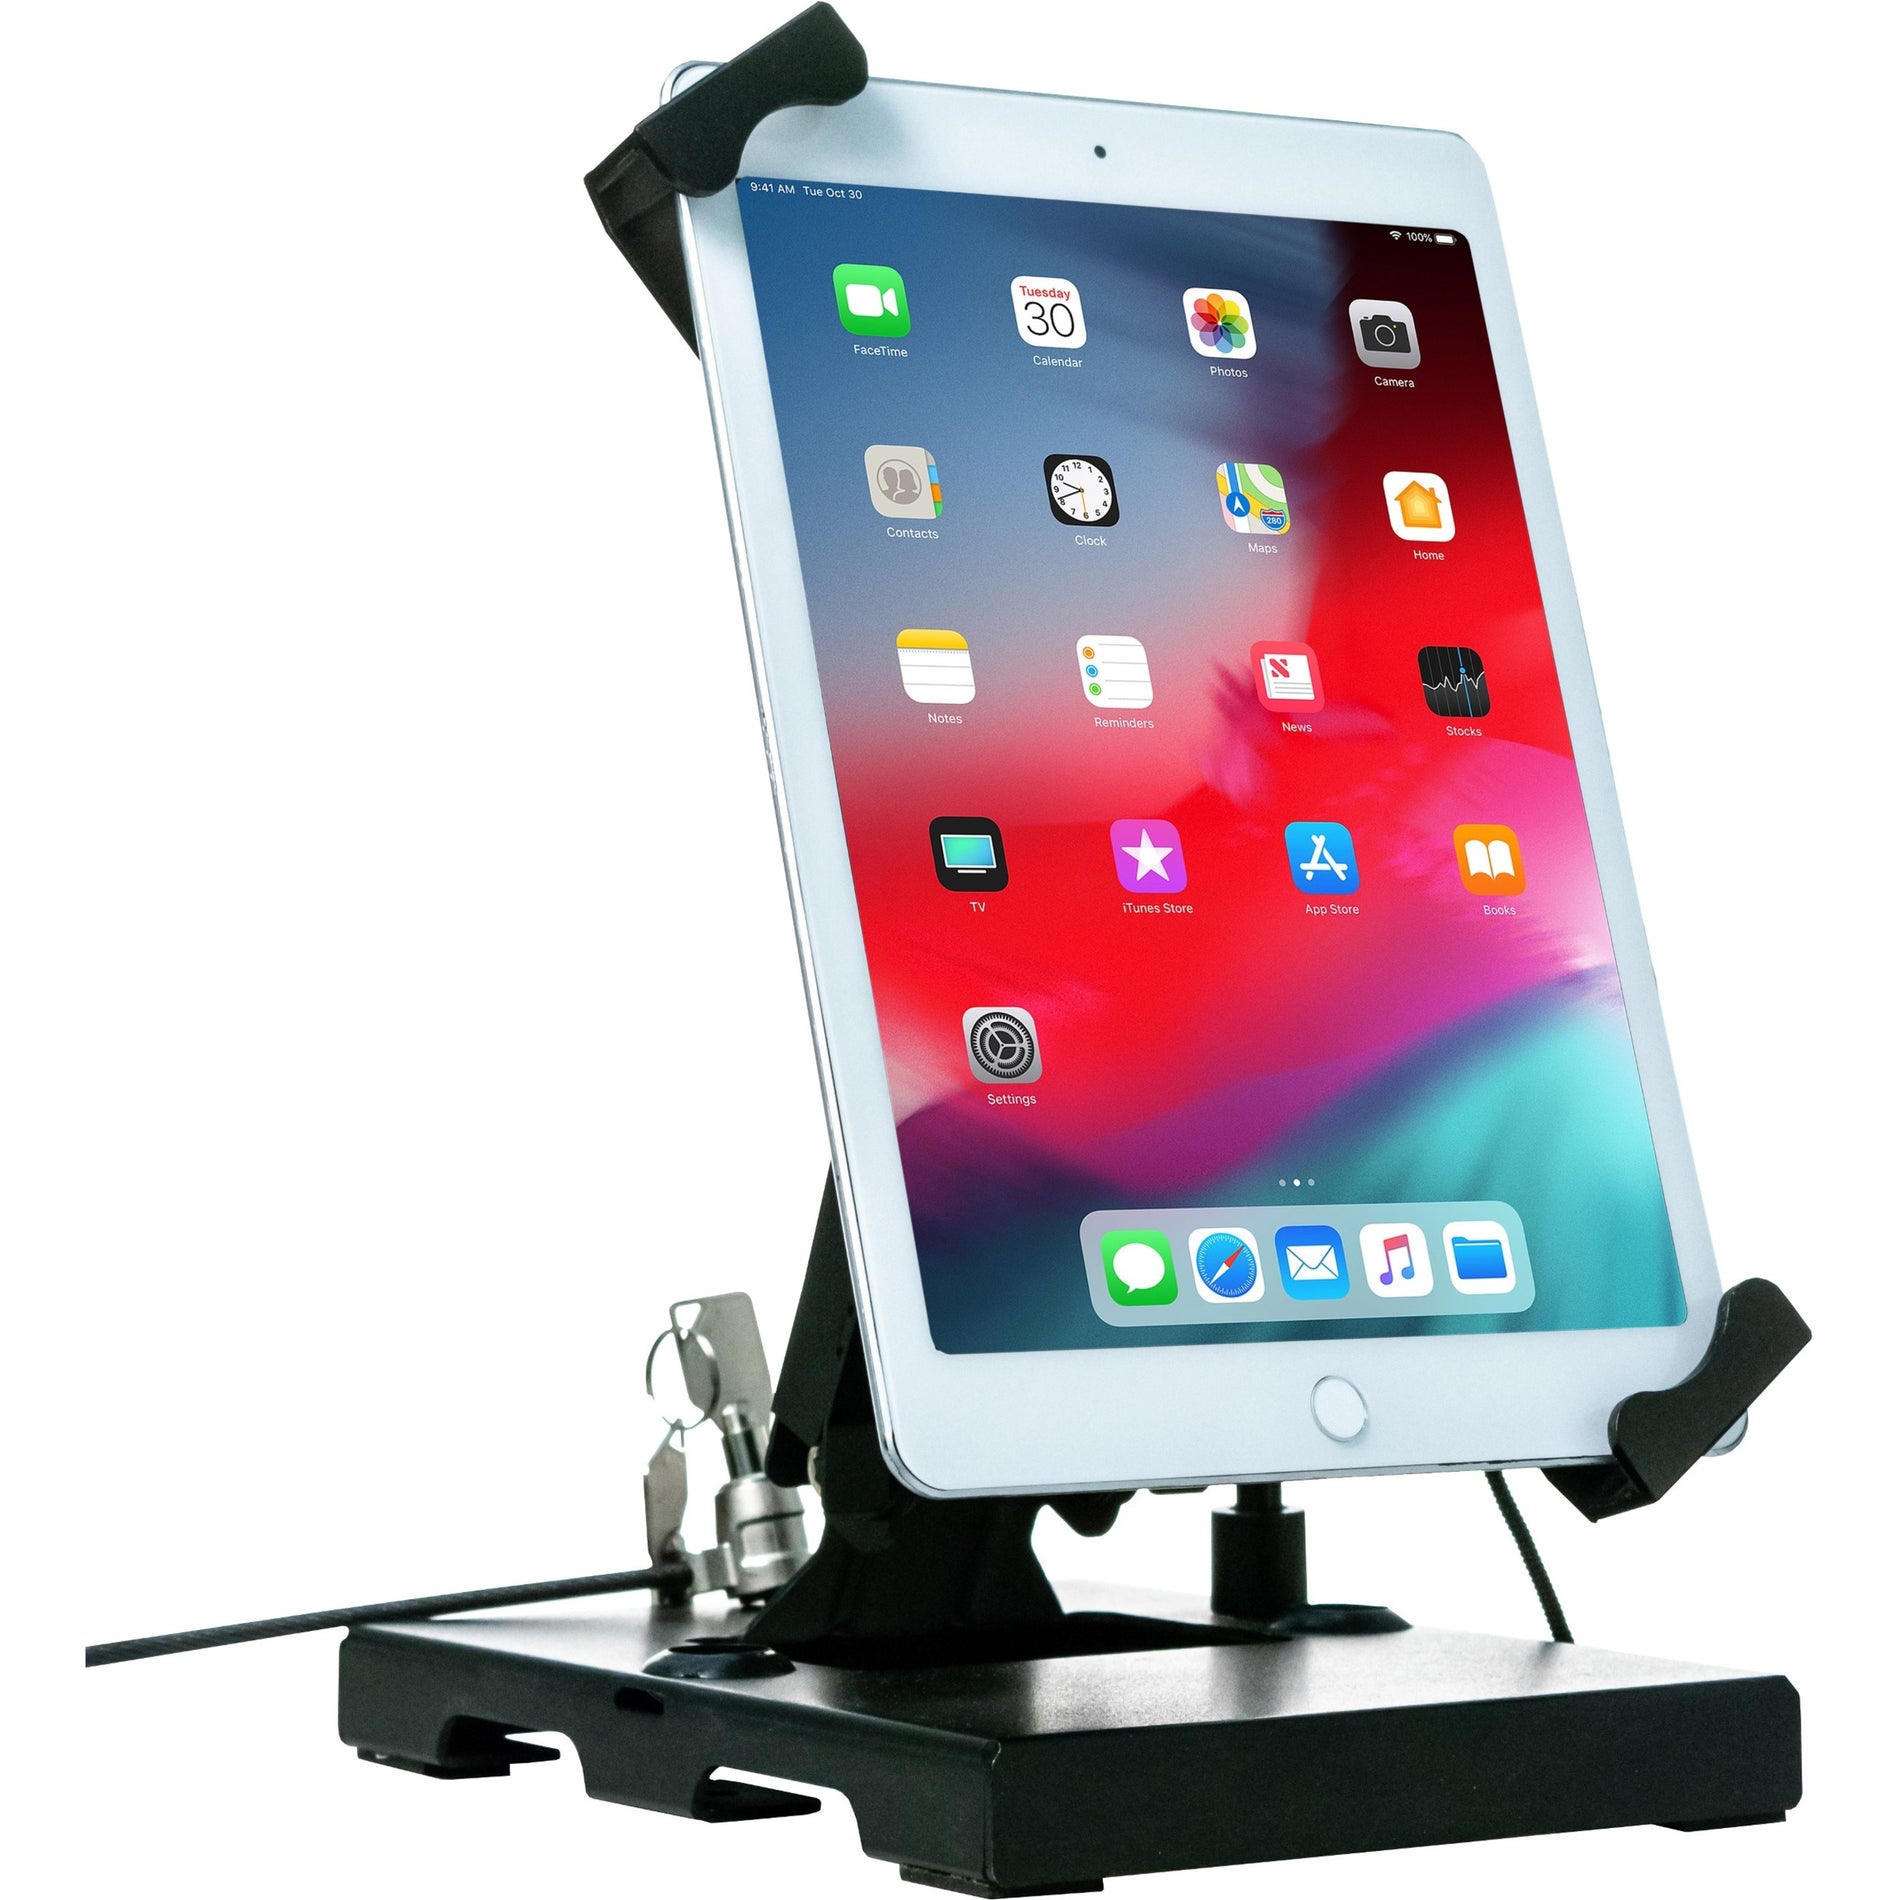 CTA Digital PAD-FTSU Flat-Folding Tabletop Security Stand for 7-14 Inch Tablets, Padded, Lockable, Adjustable Angle, Foldable, Sturdy, 360° Rotation, Cable Management